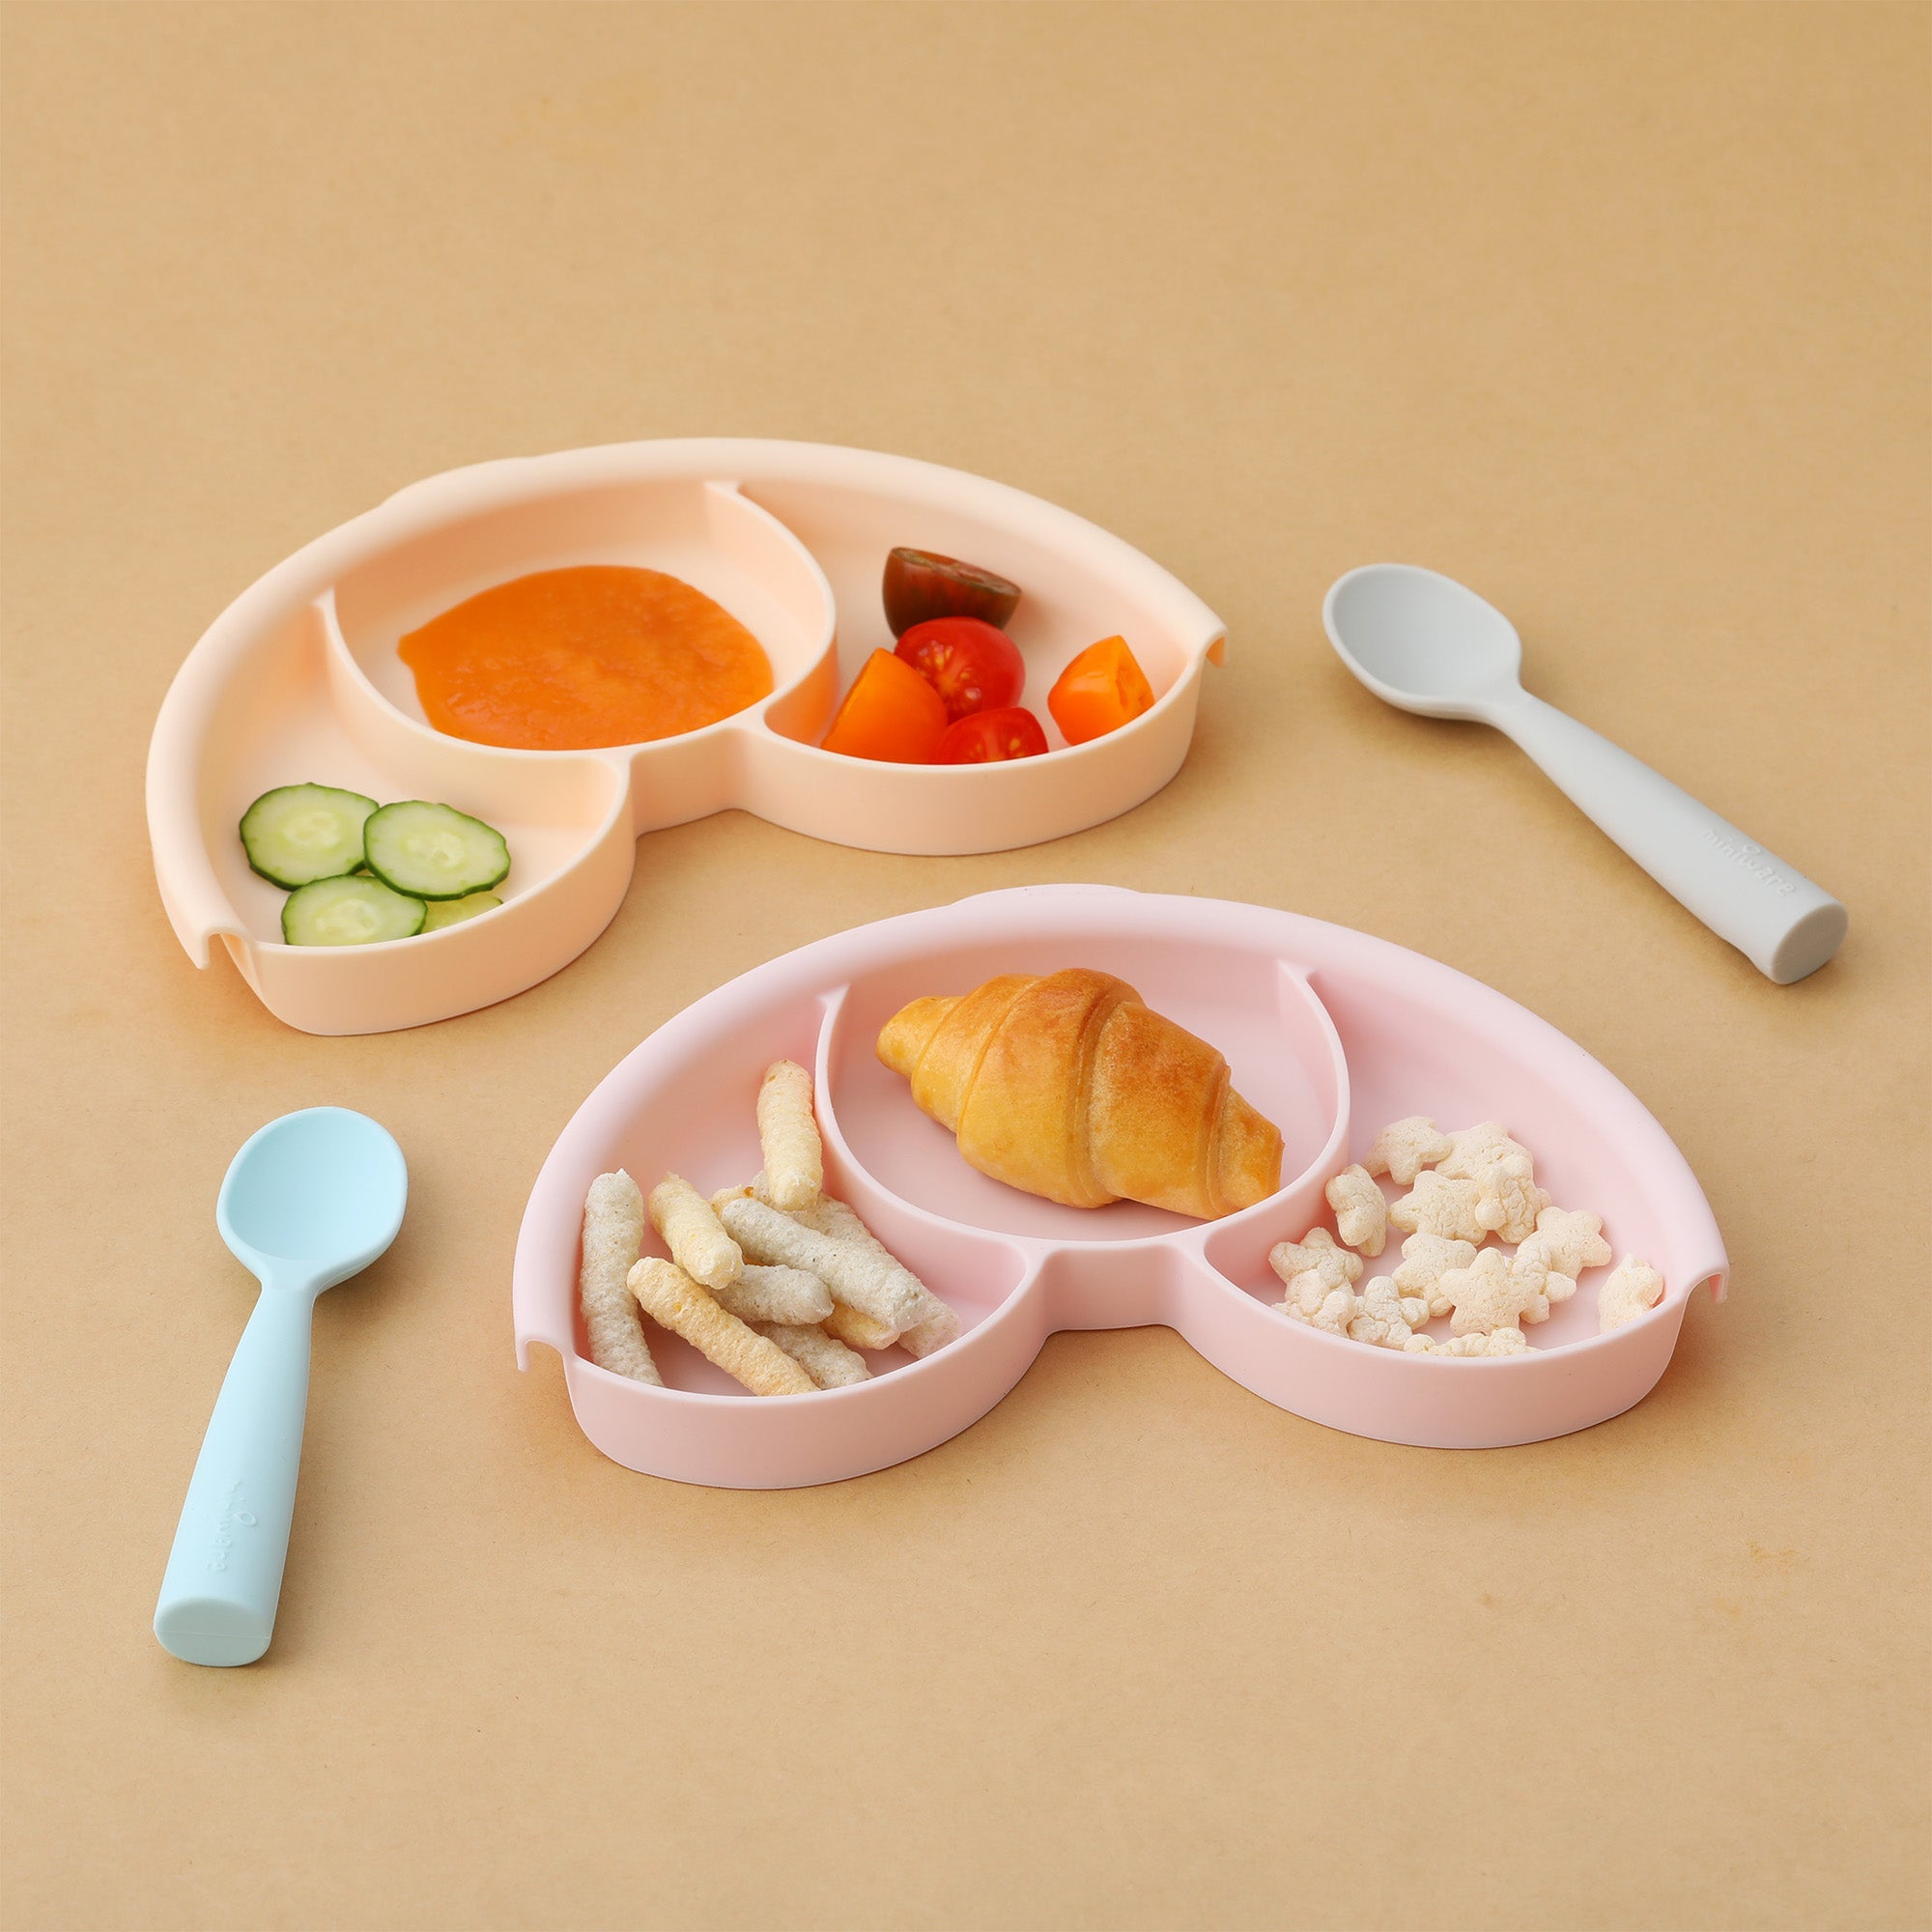 Miniware Sandwich Plate Smart Divider - Silicone Plate Divider for Kids